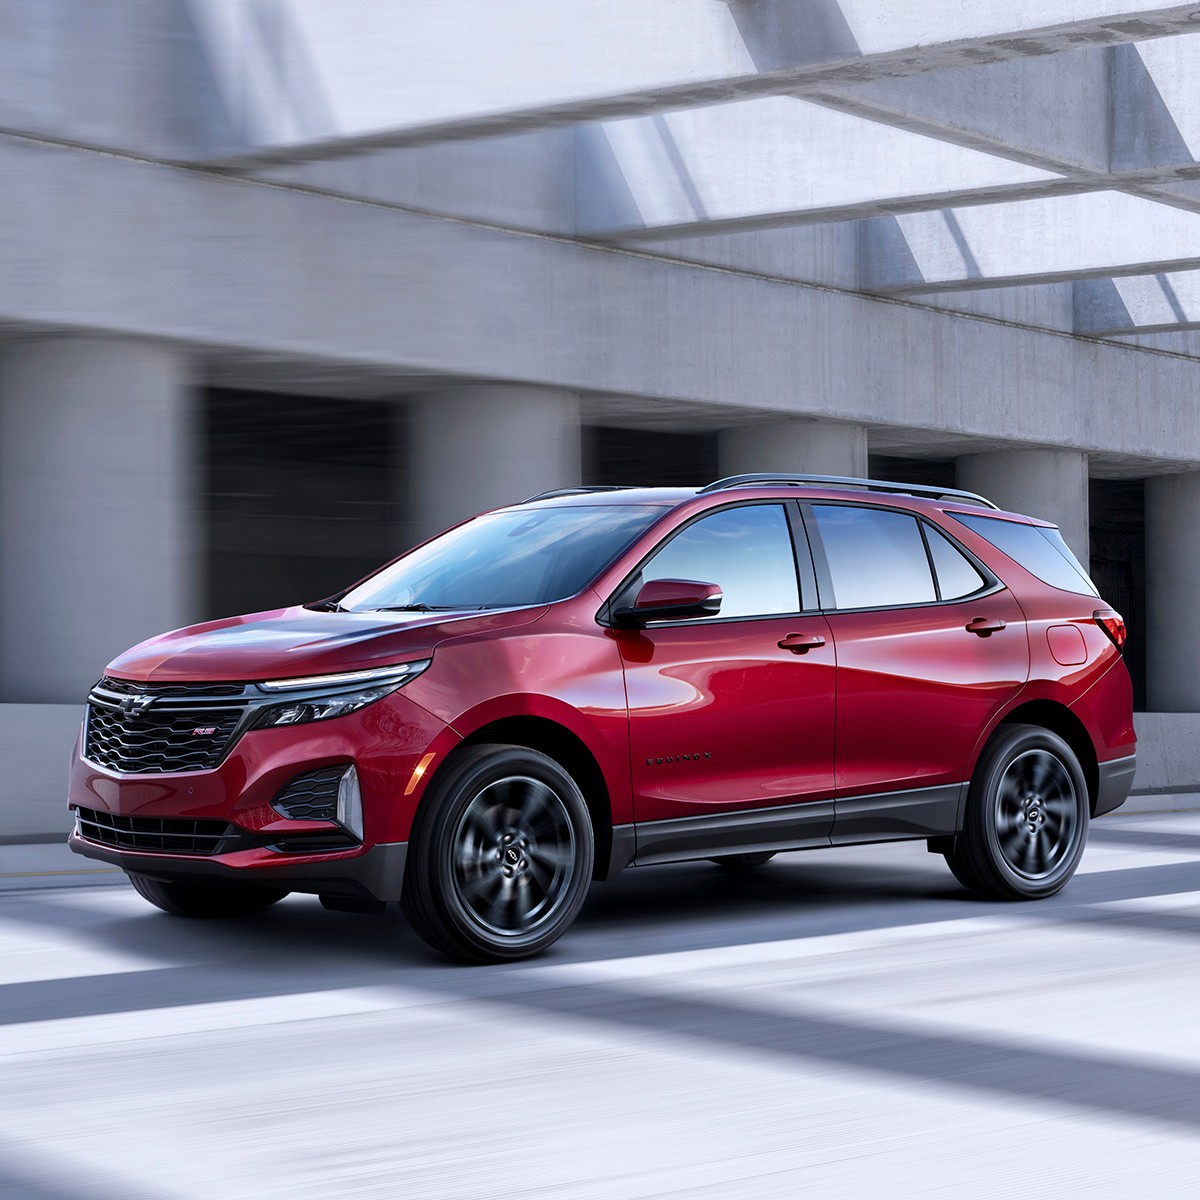 2021 Chevrolet Equinox Engine Options, Ground Clearance ...